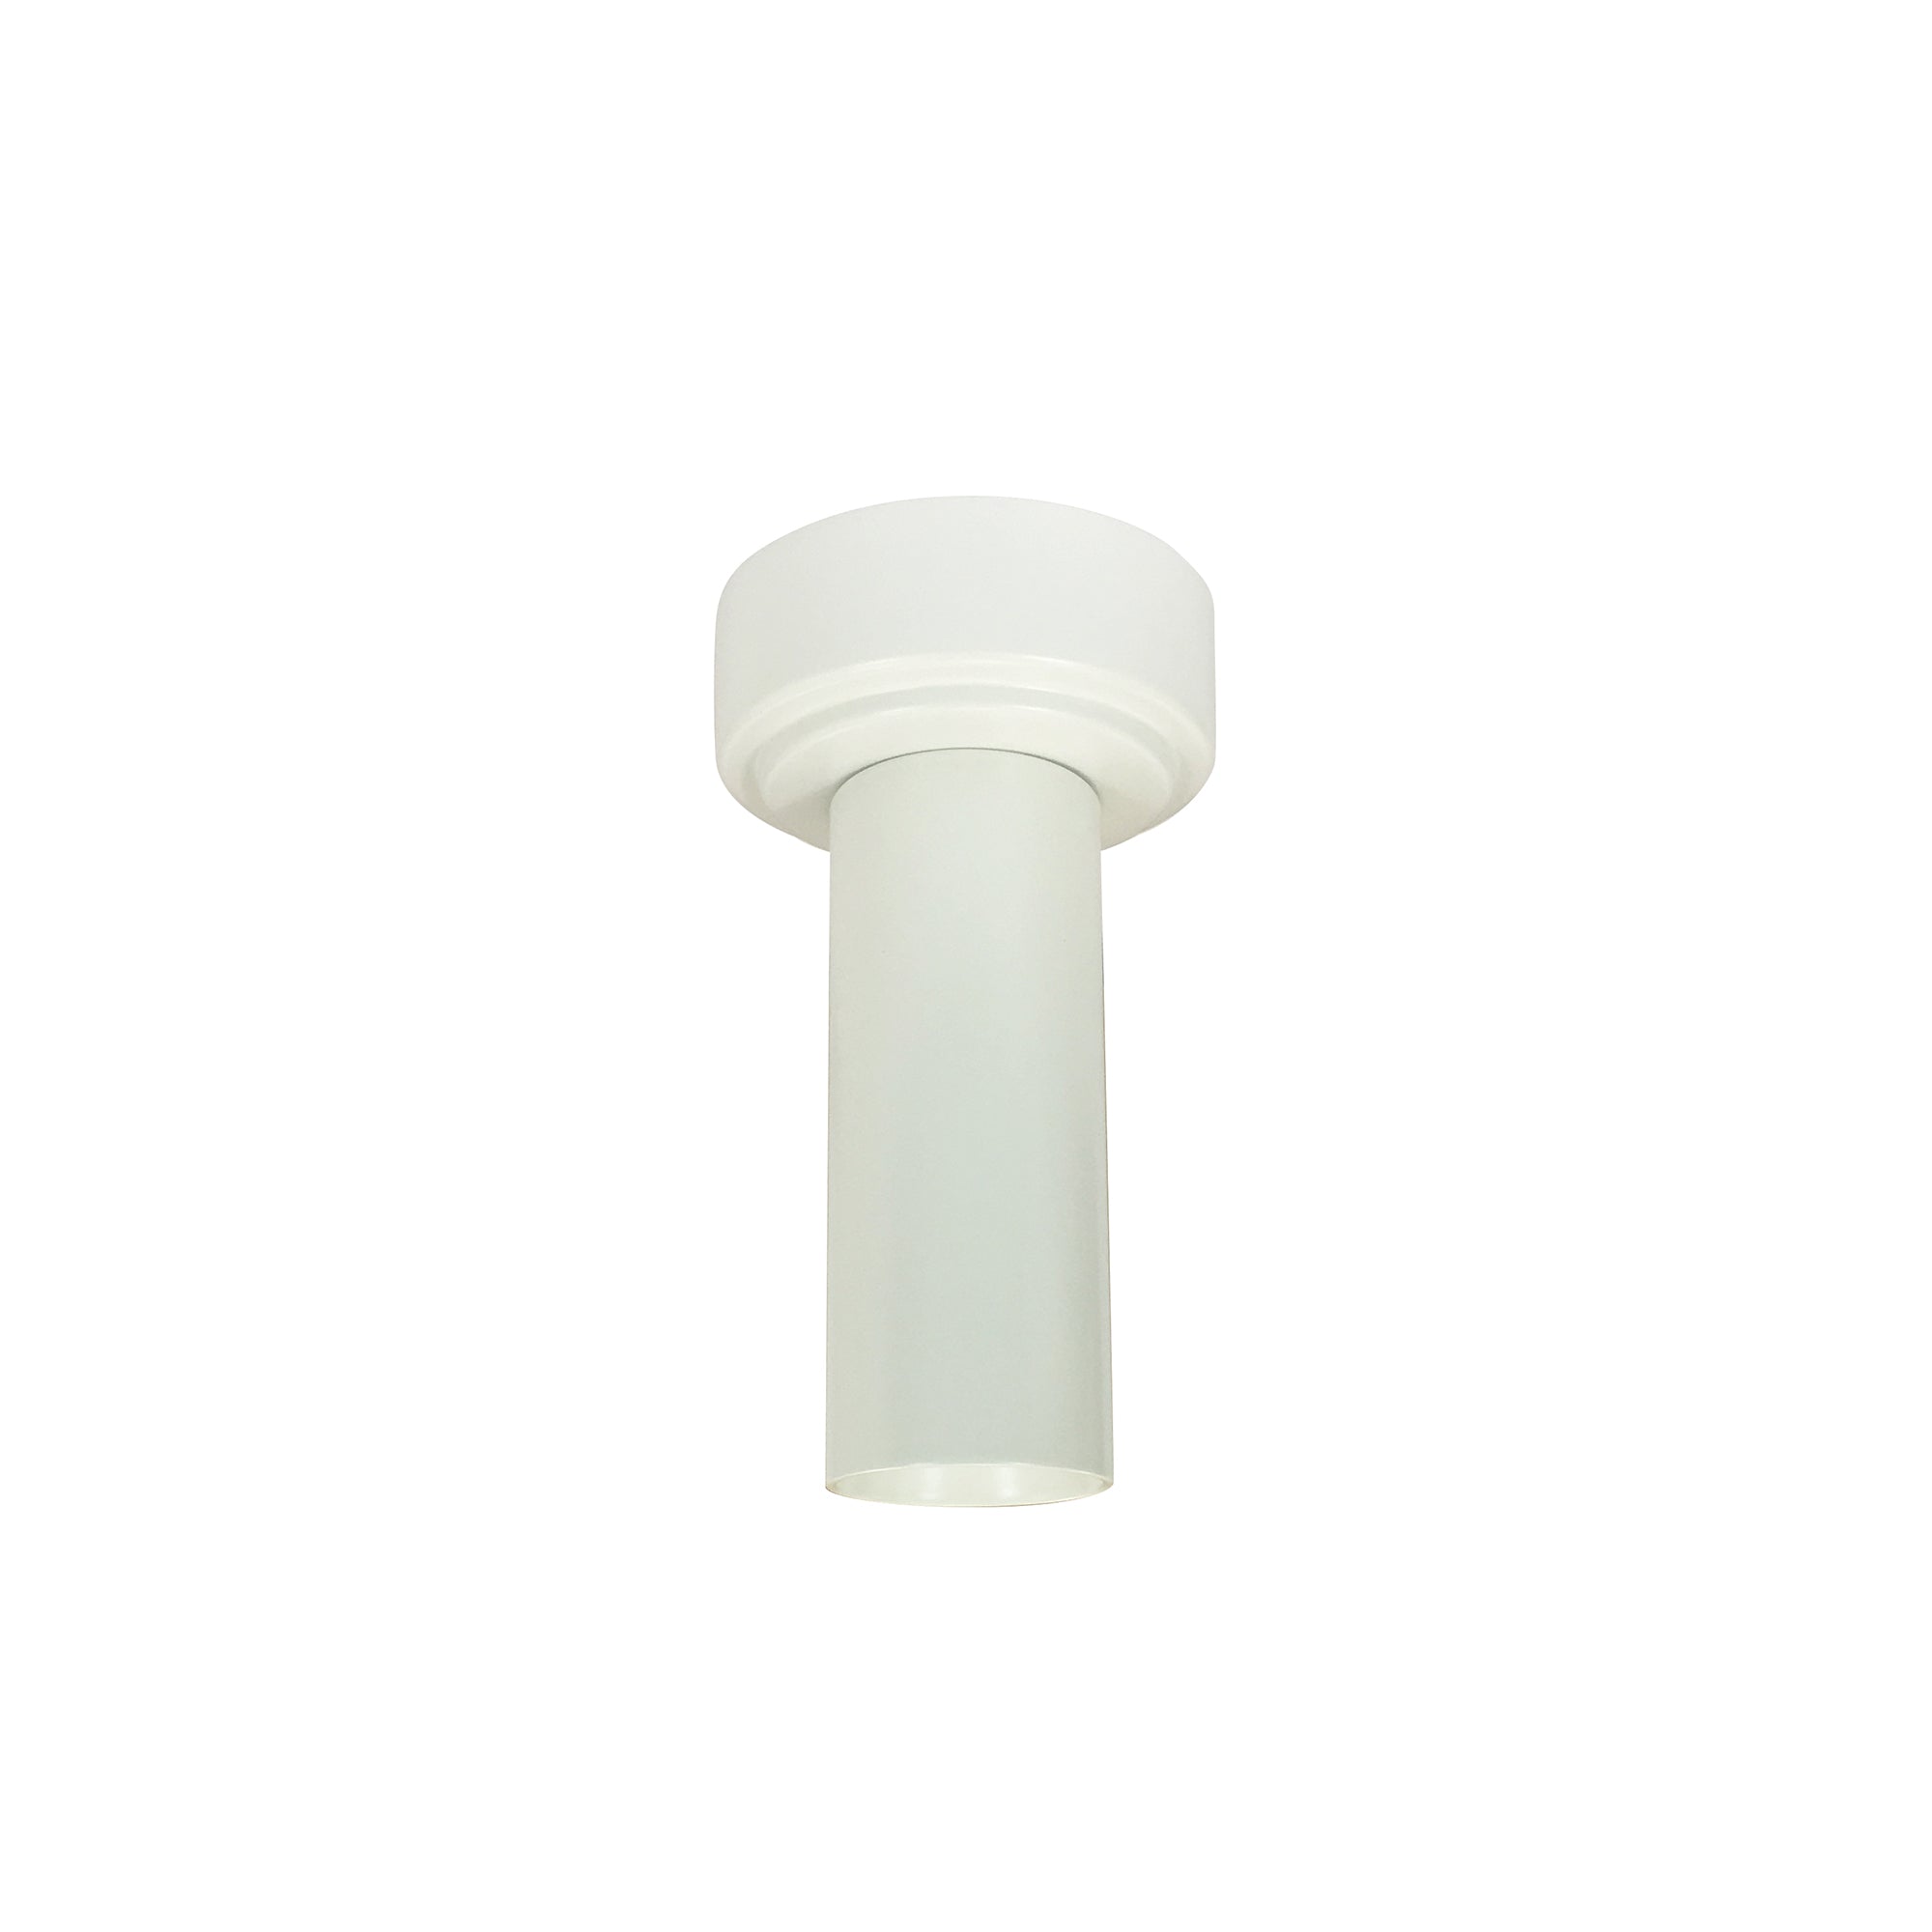 Nora Lighting LE56 - NYLM-2SCCDXWWLE4A - Cylinder - White